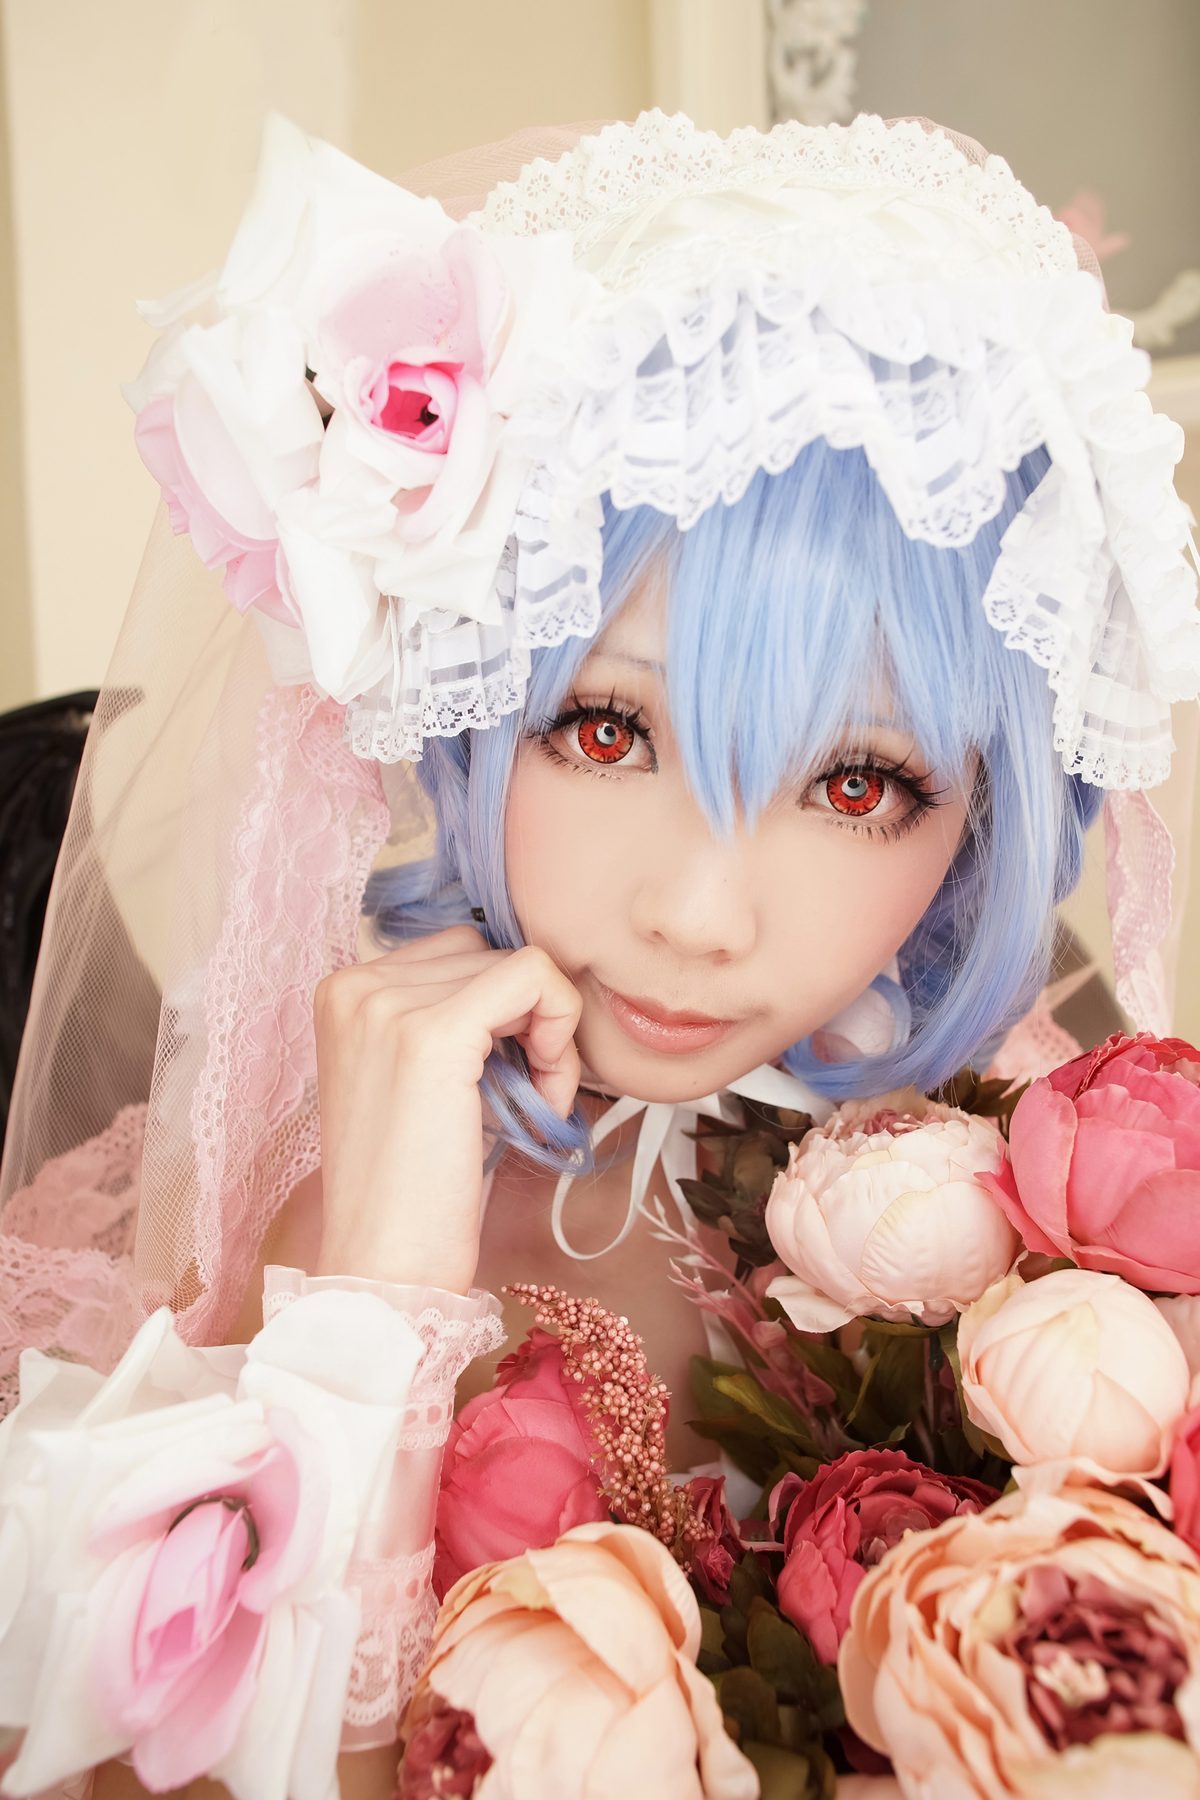 View - Coser@Ely_eee ElyEE子 - 蕾米莉亚·斯卡雷特 A - 